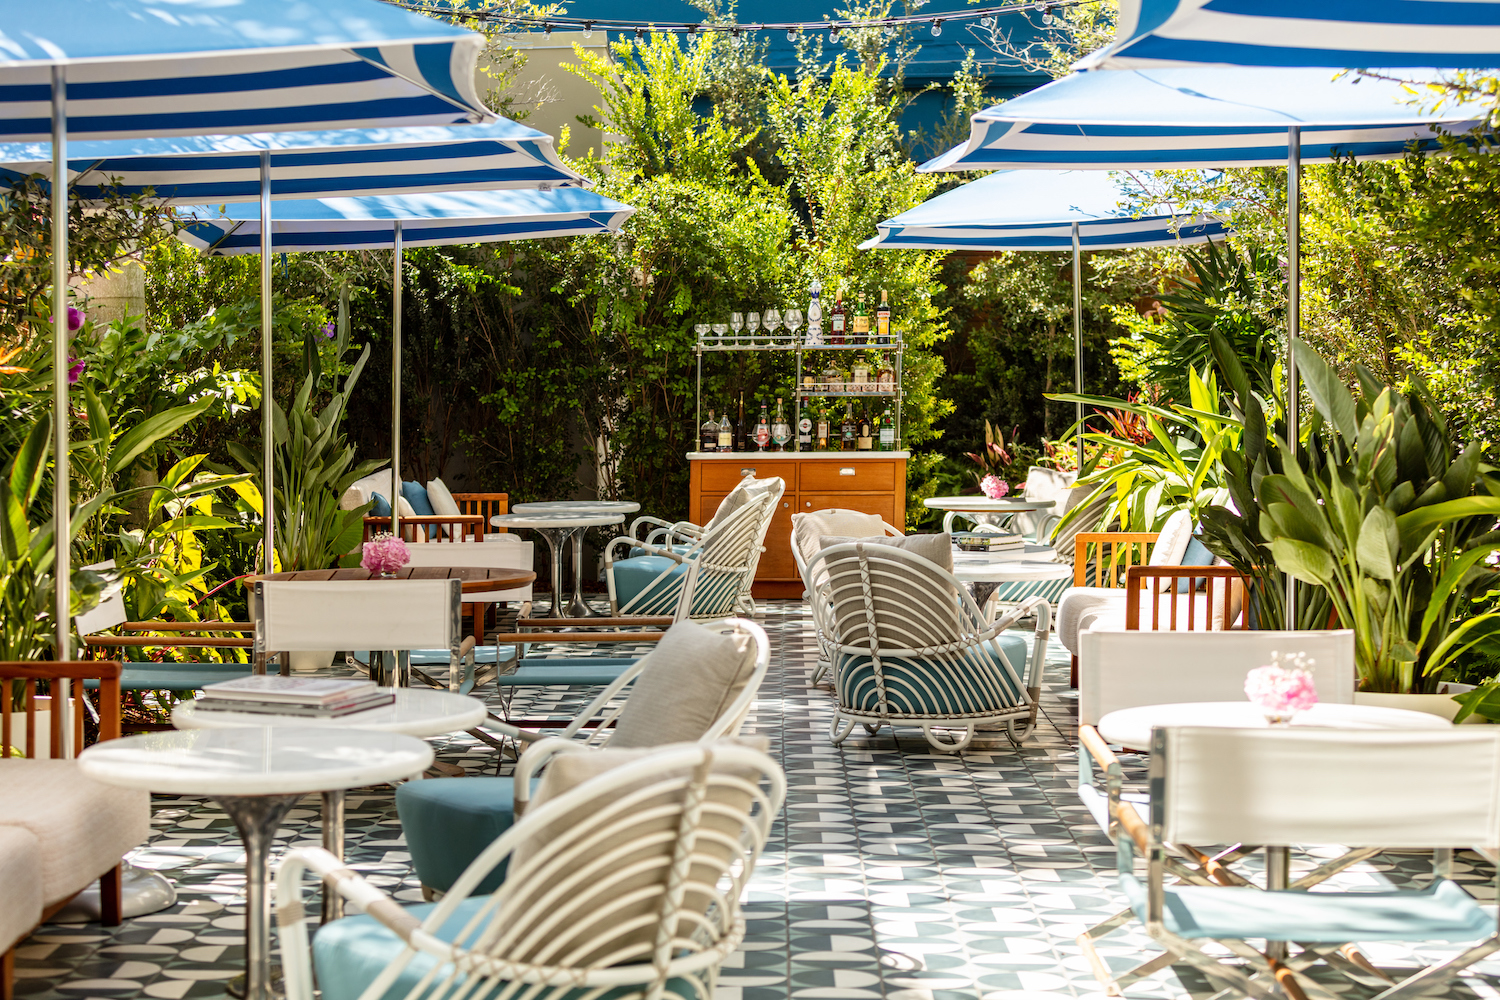 a patio restaurant with blue and white striped umbrellas and lots of greenery